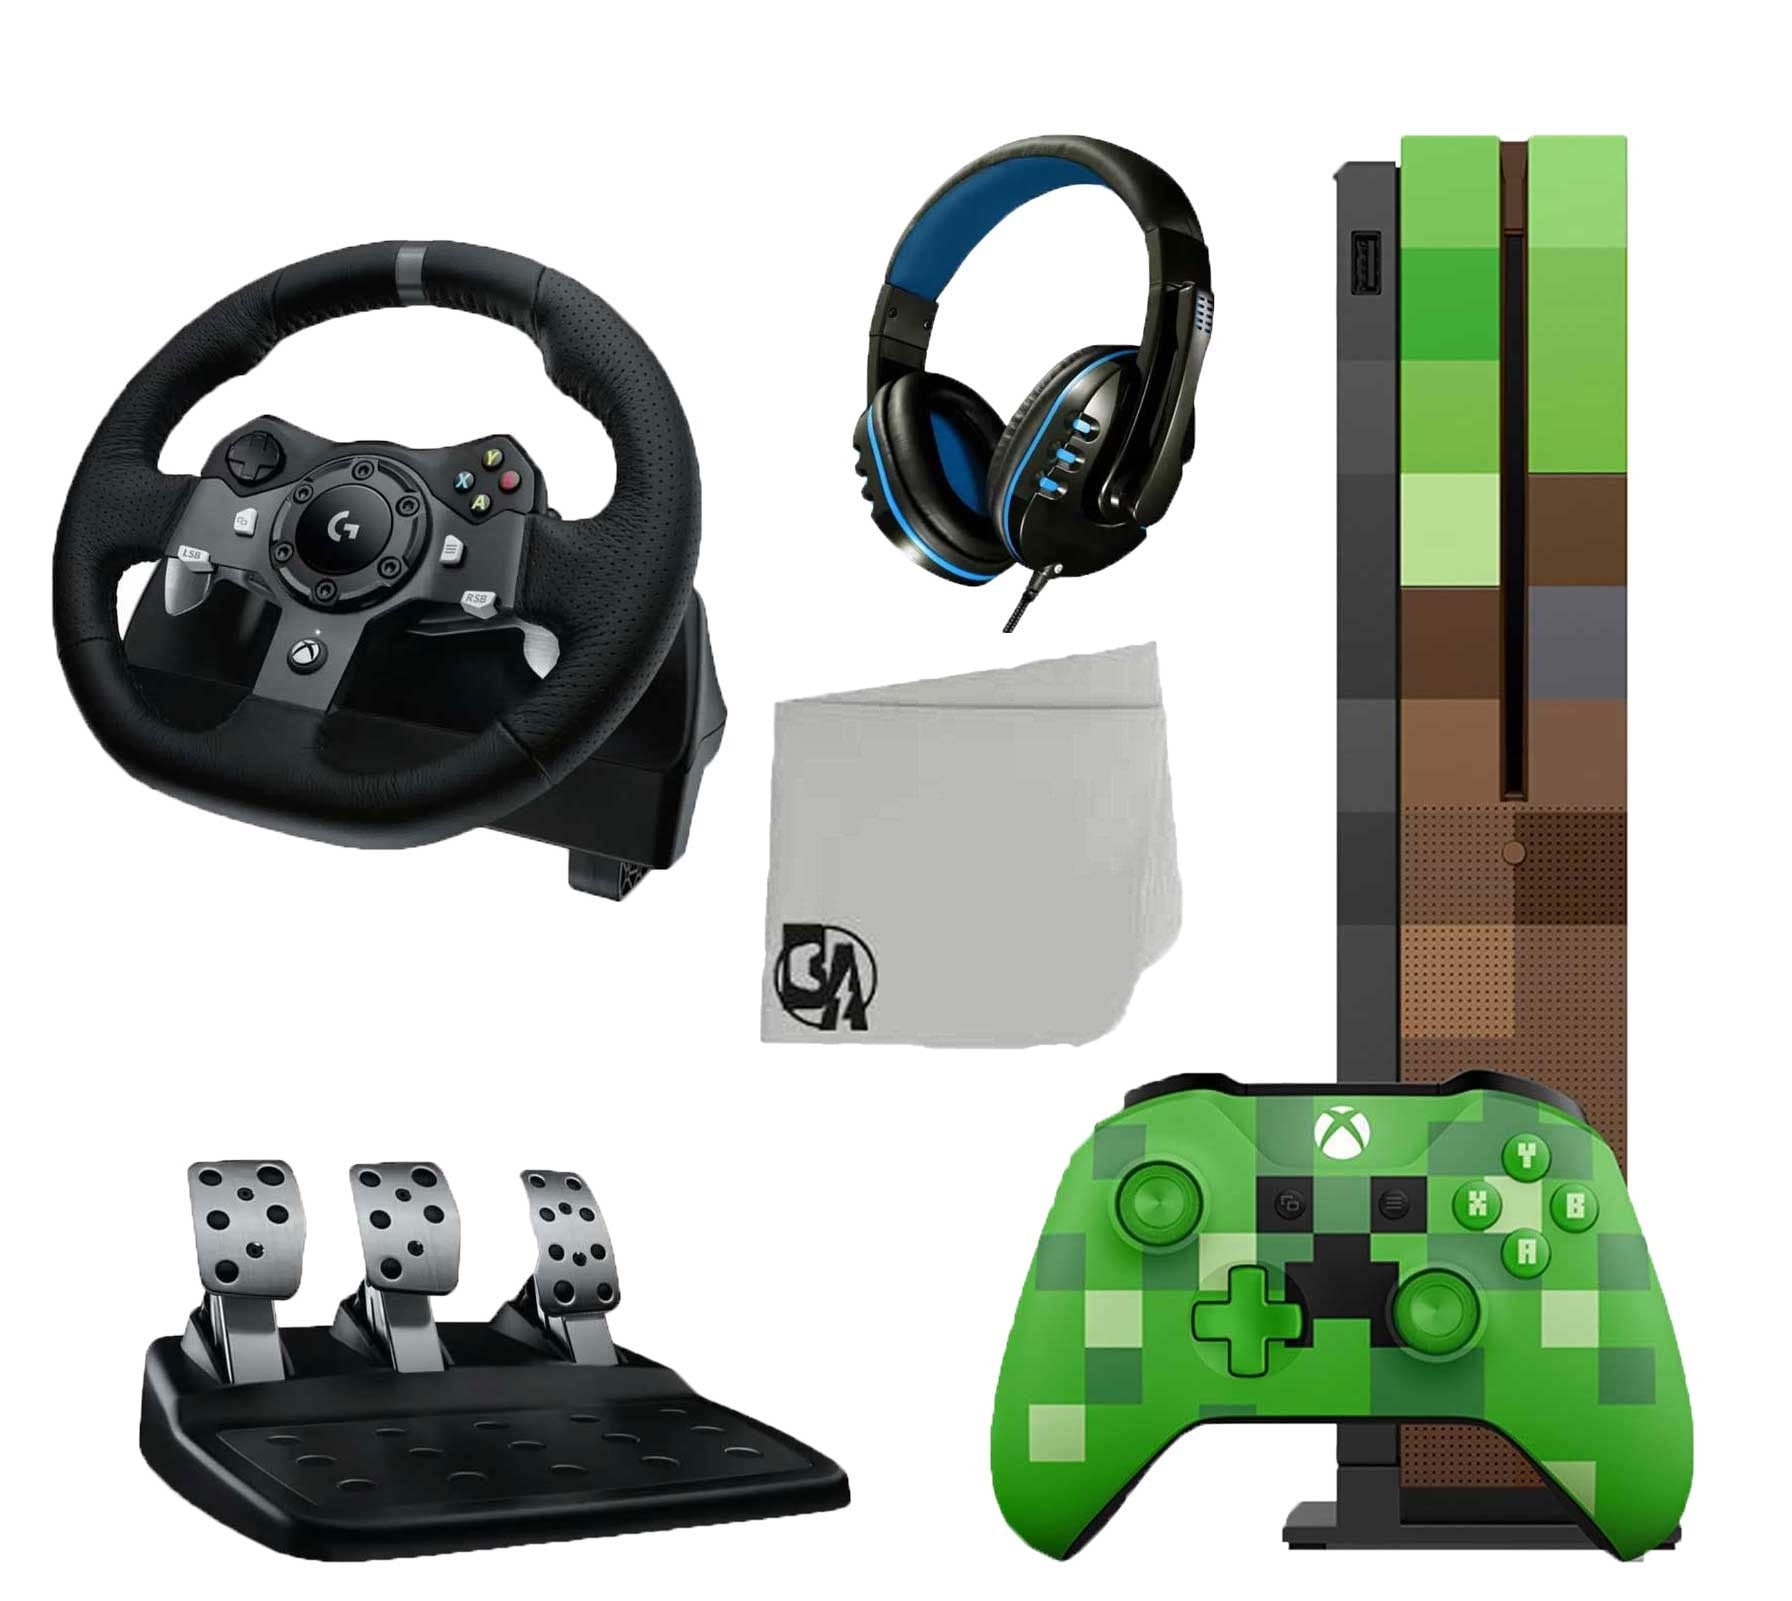 applaus toetje Vriendin Microsoft 23C-00001 Xbox One S Minecraft Limited Edition 1TB Gaming Console  with Logitech G920 Steering Wheel BOLT AXTION Bundle Used - Walmart.com